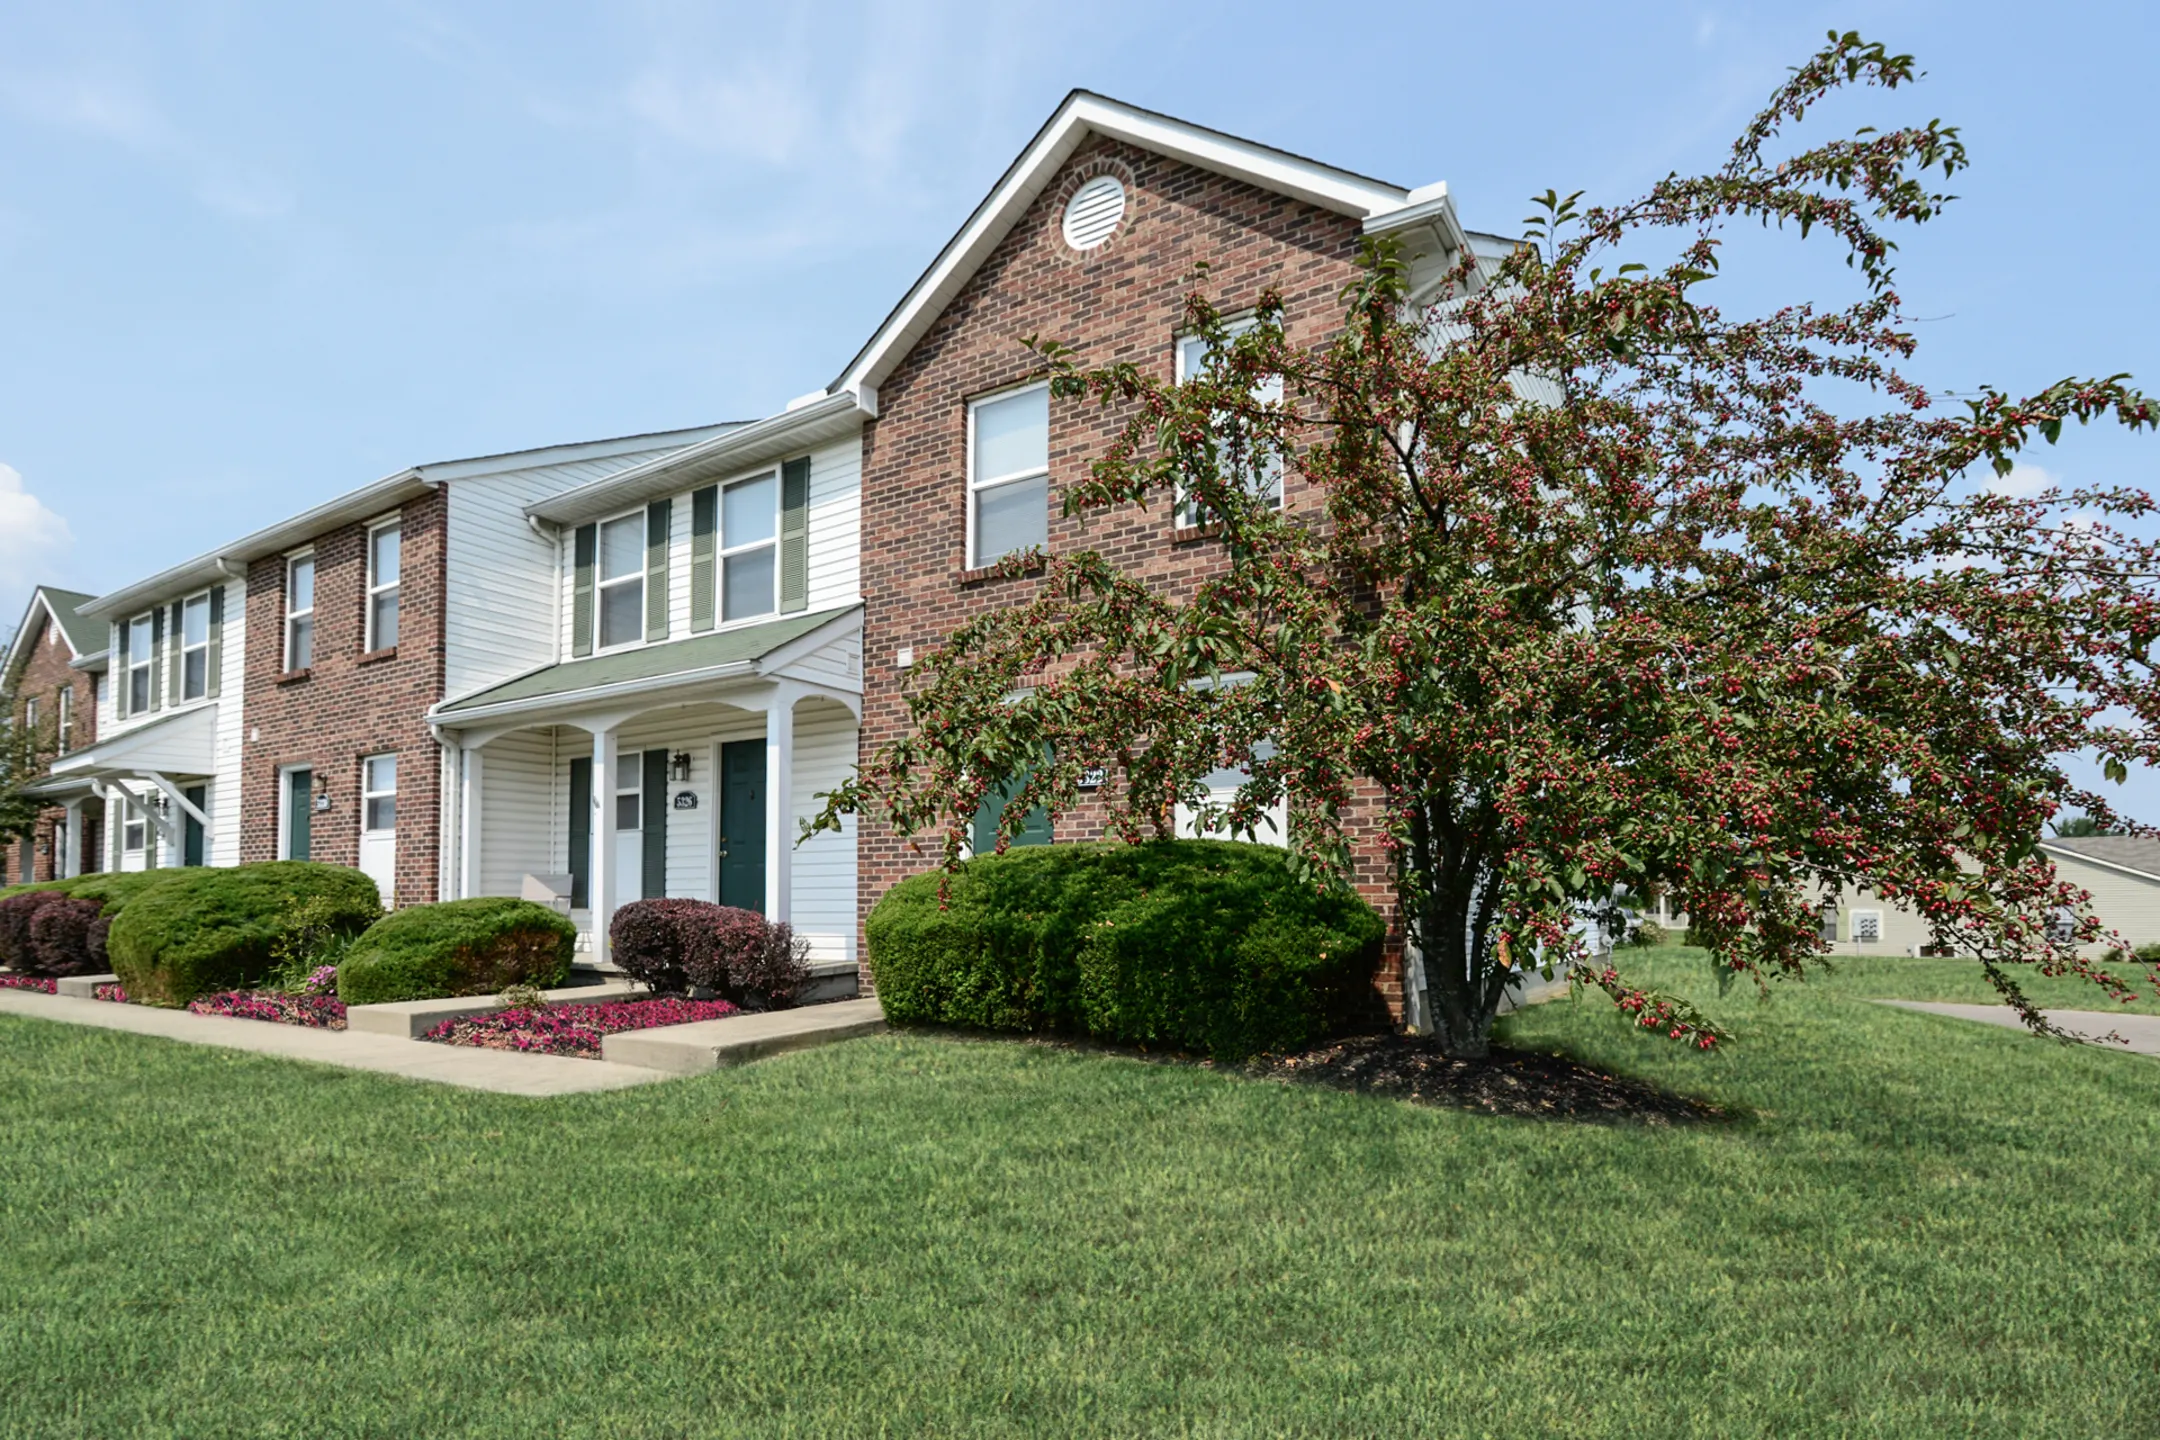 Building - Creekside Townhomes / Cherryhill - Columbus, OH